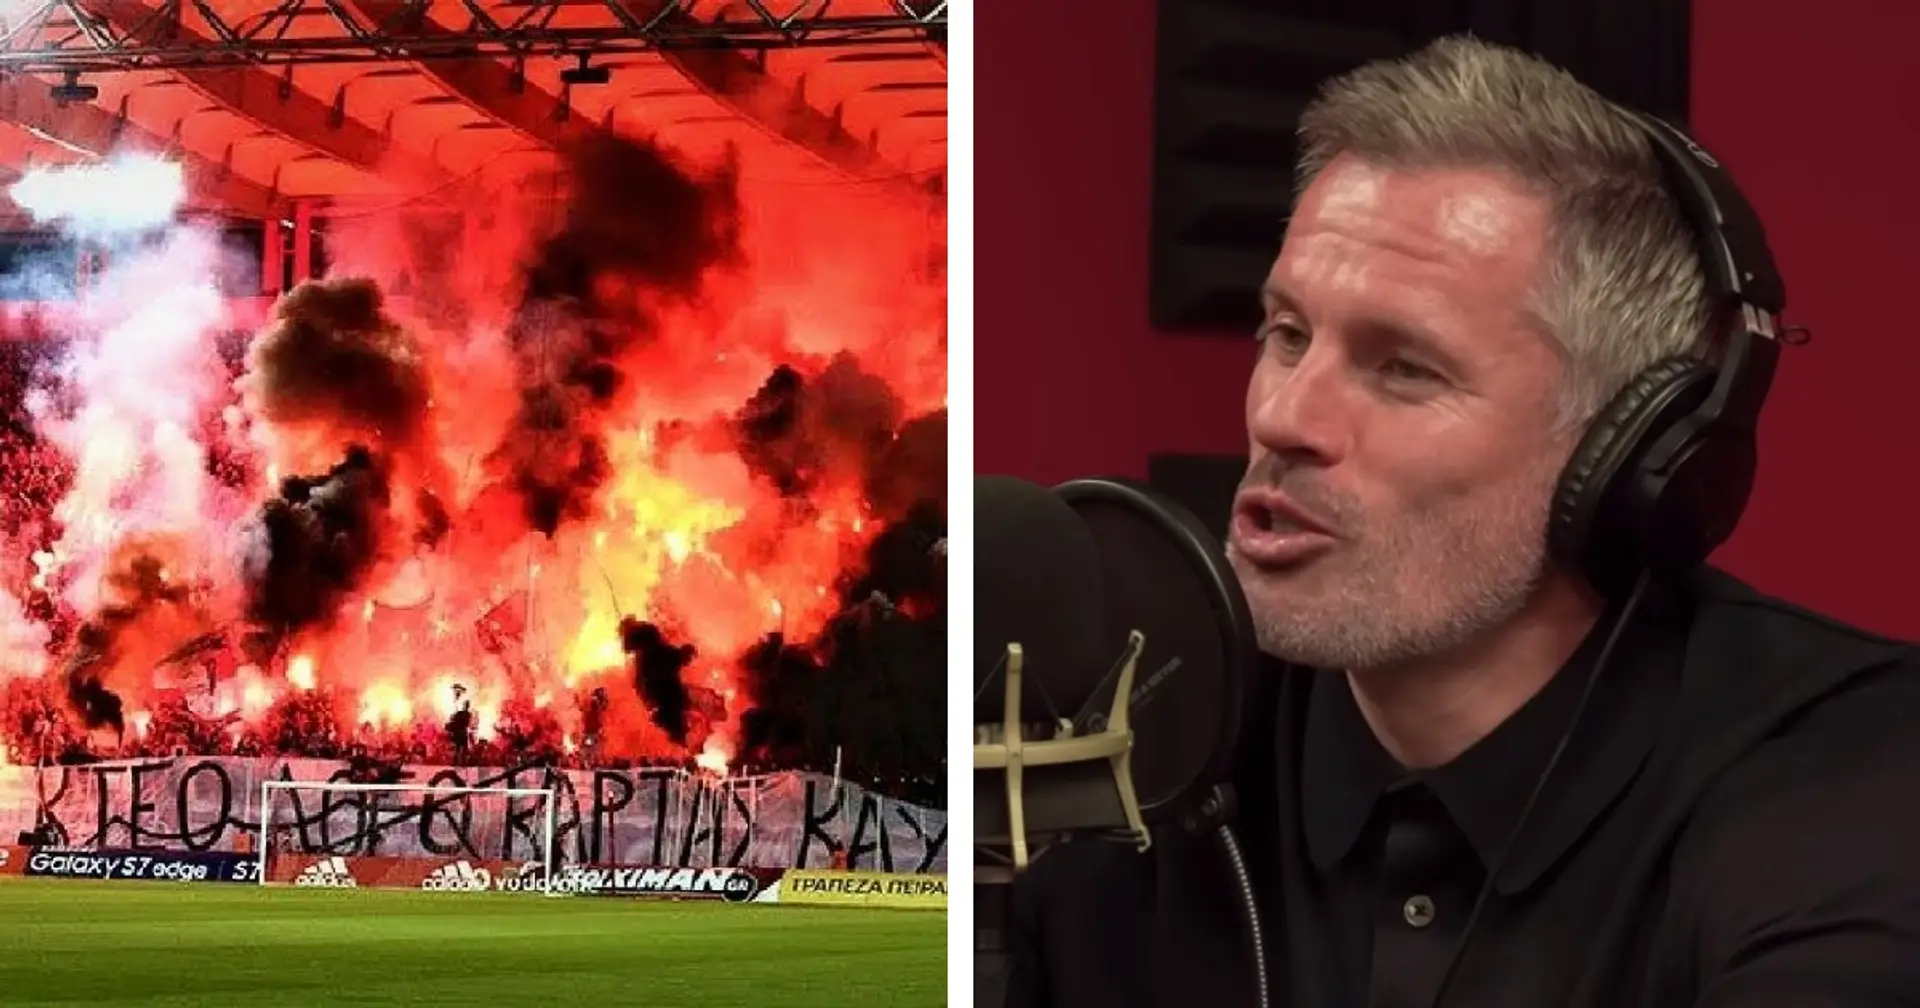 'In warm up you're thinking this could go off here': Carragher names most intimidating away ground he played at